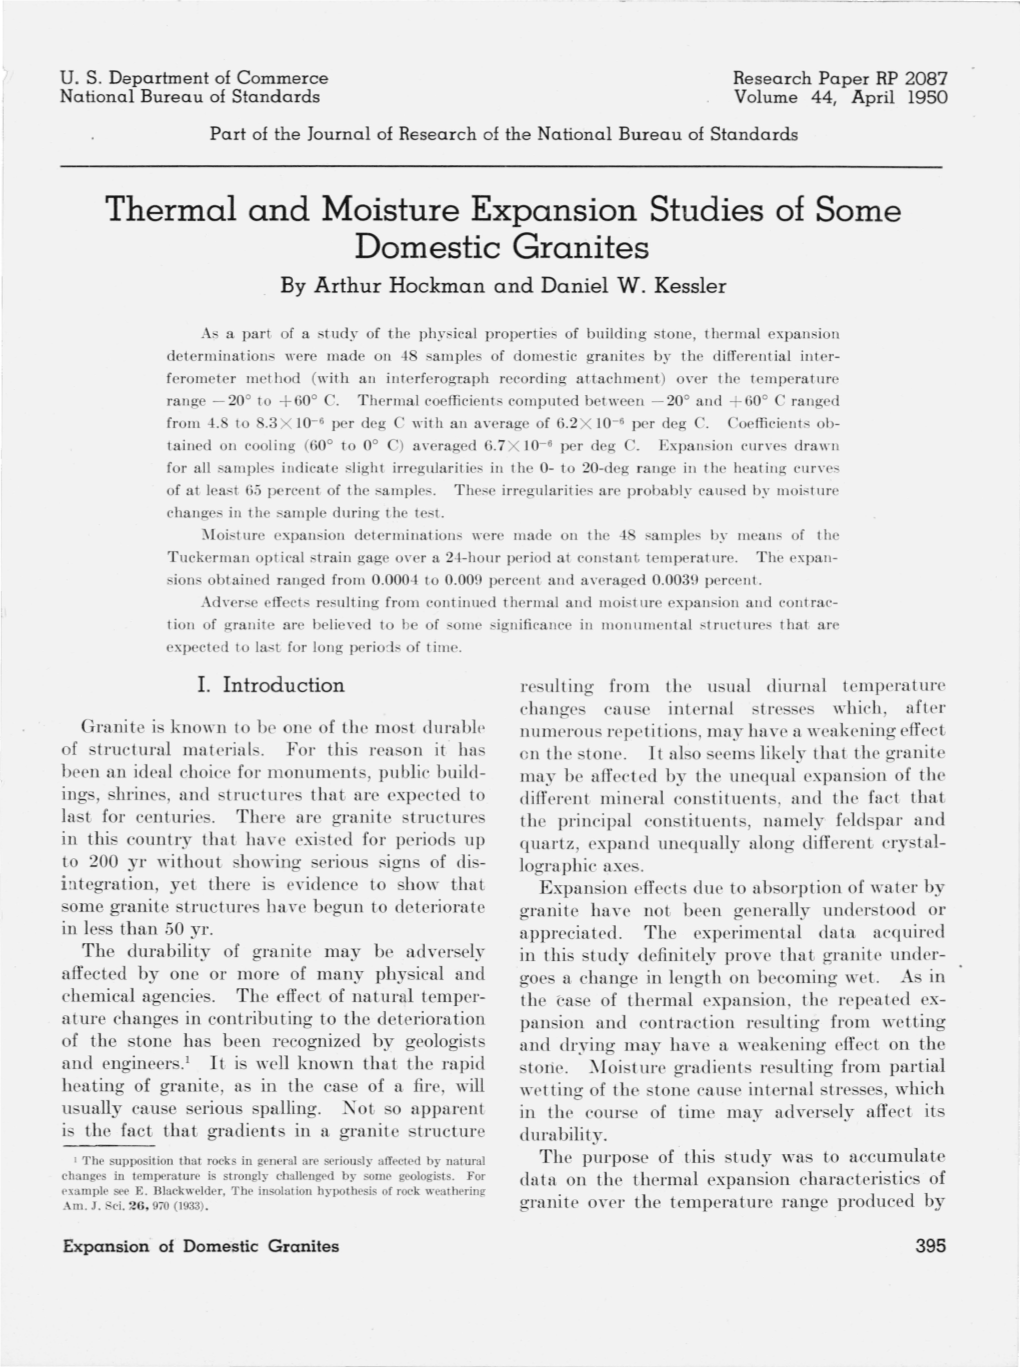 Thermal and Moisture Expansion Studies of Some Domestic Granites by Arthur Hockman and Daniel W